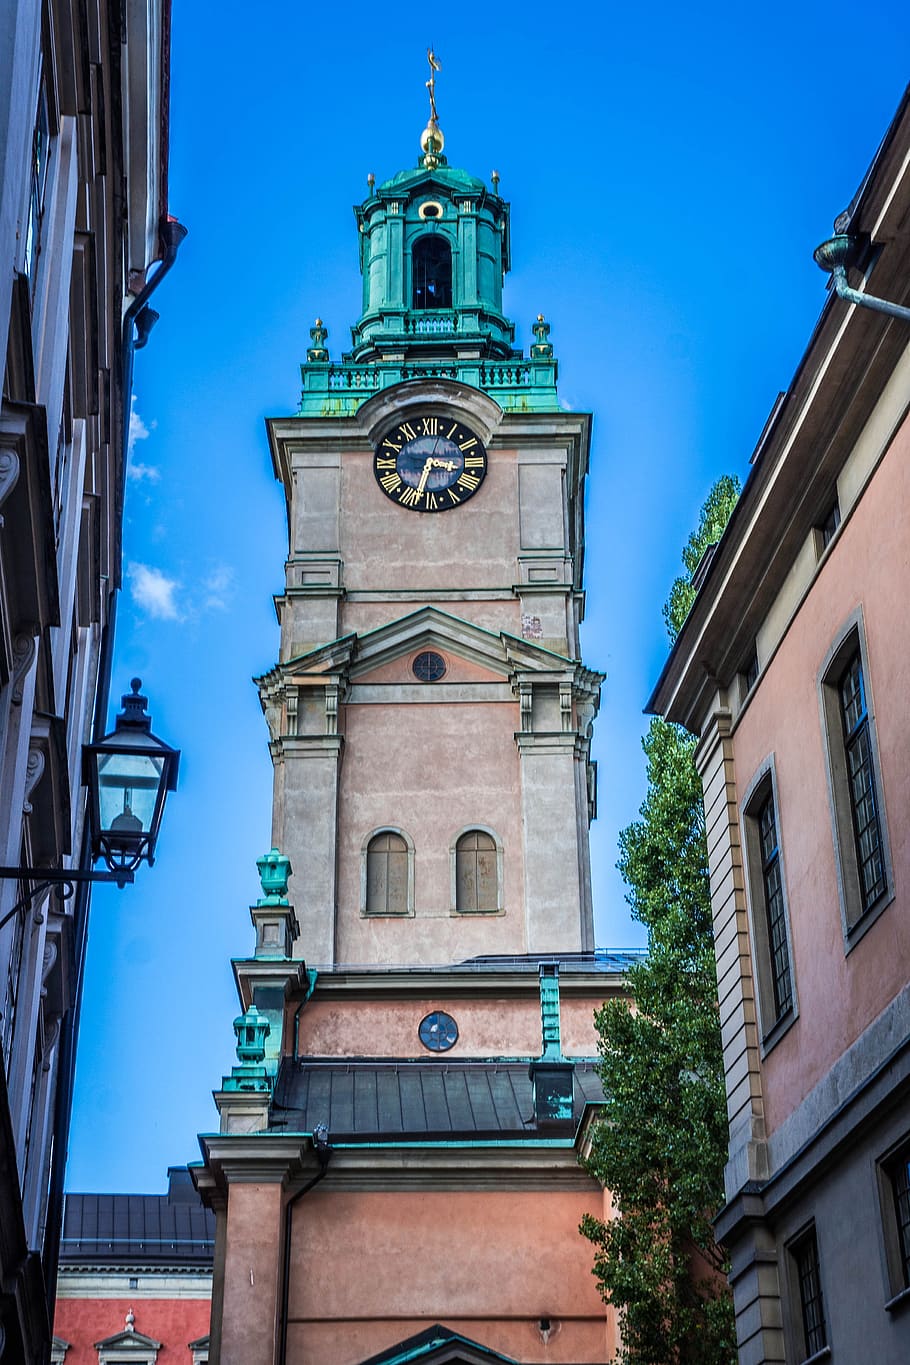 stockholm, church, clock tower, sweden, city, architecture, scandinavia, building, old, town